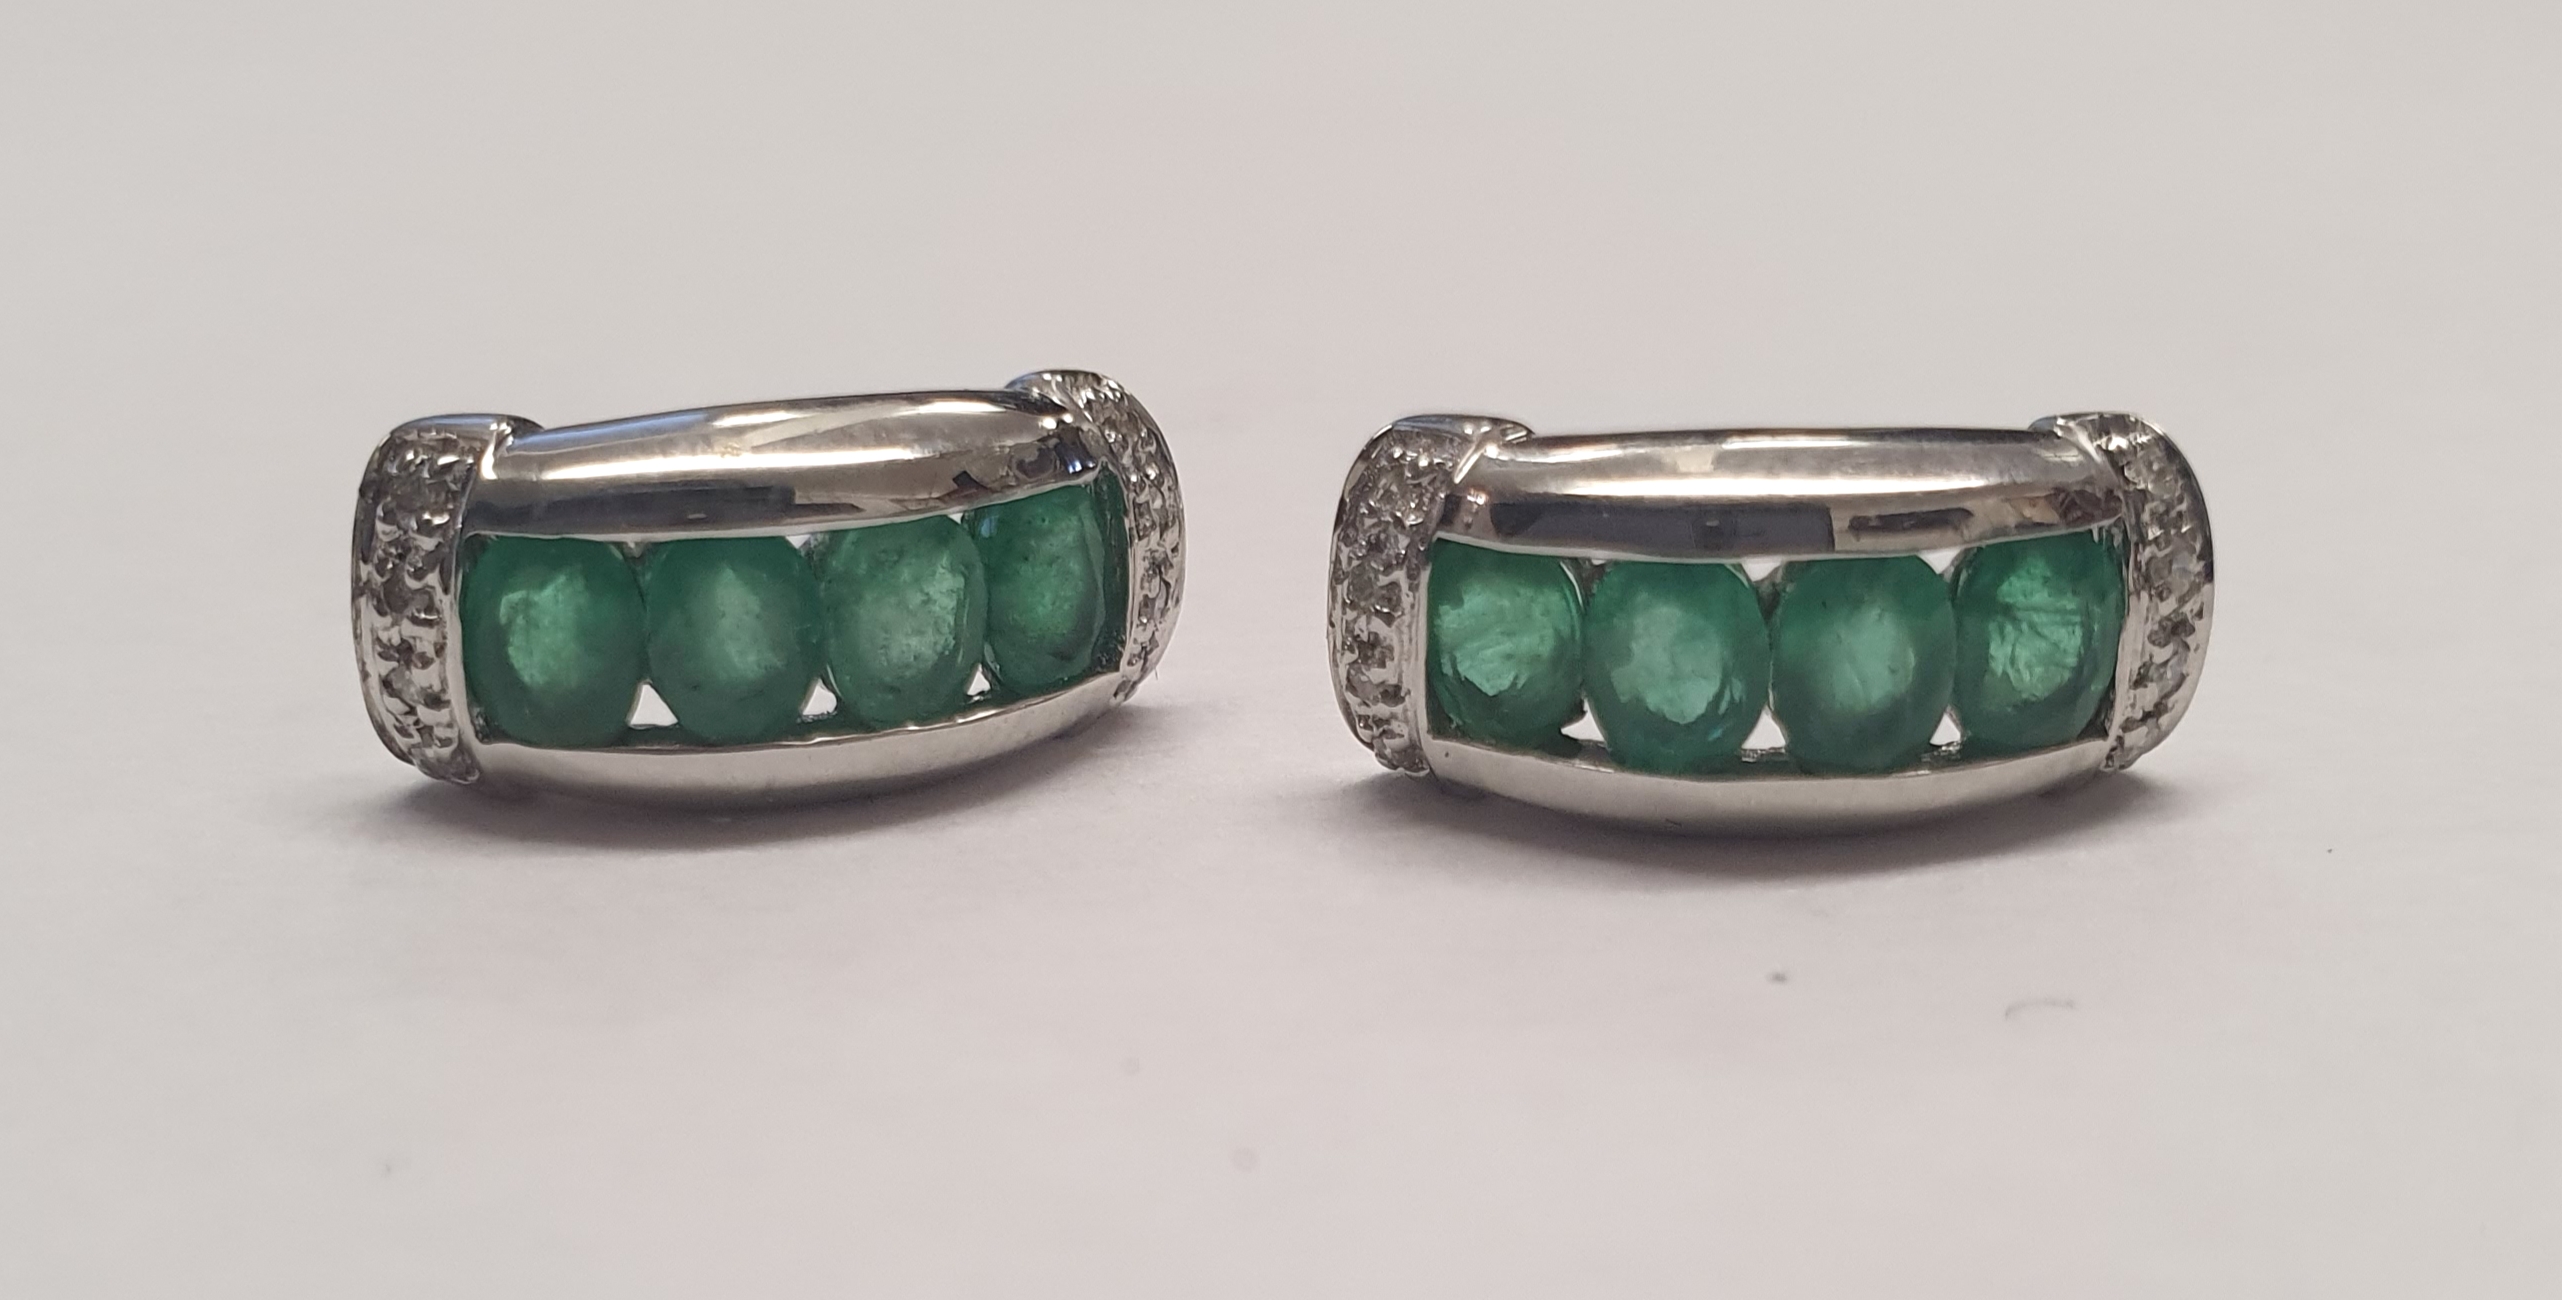 Pair of contemporary 9ct white gold, emerald and diamond earrings. P&P Group 1 (£14+VAT for the